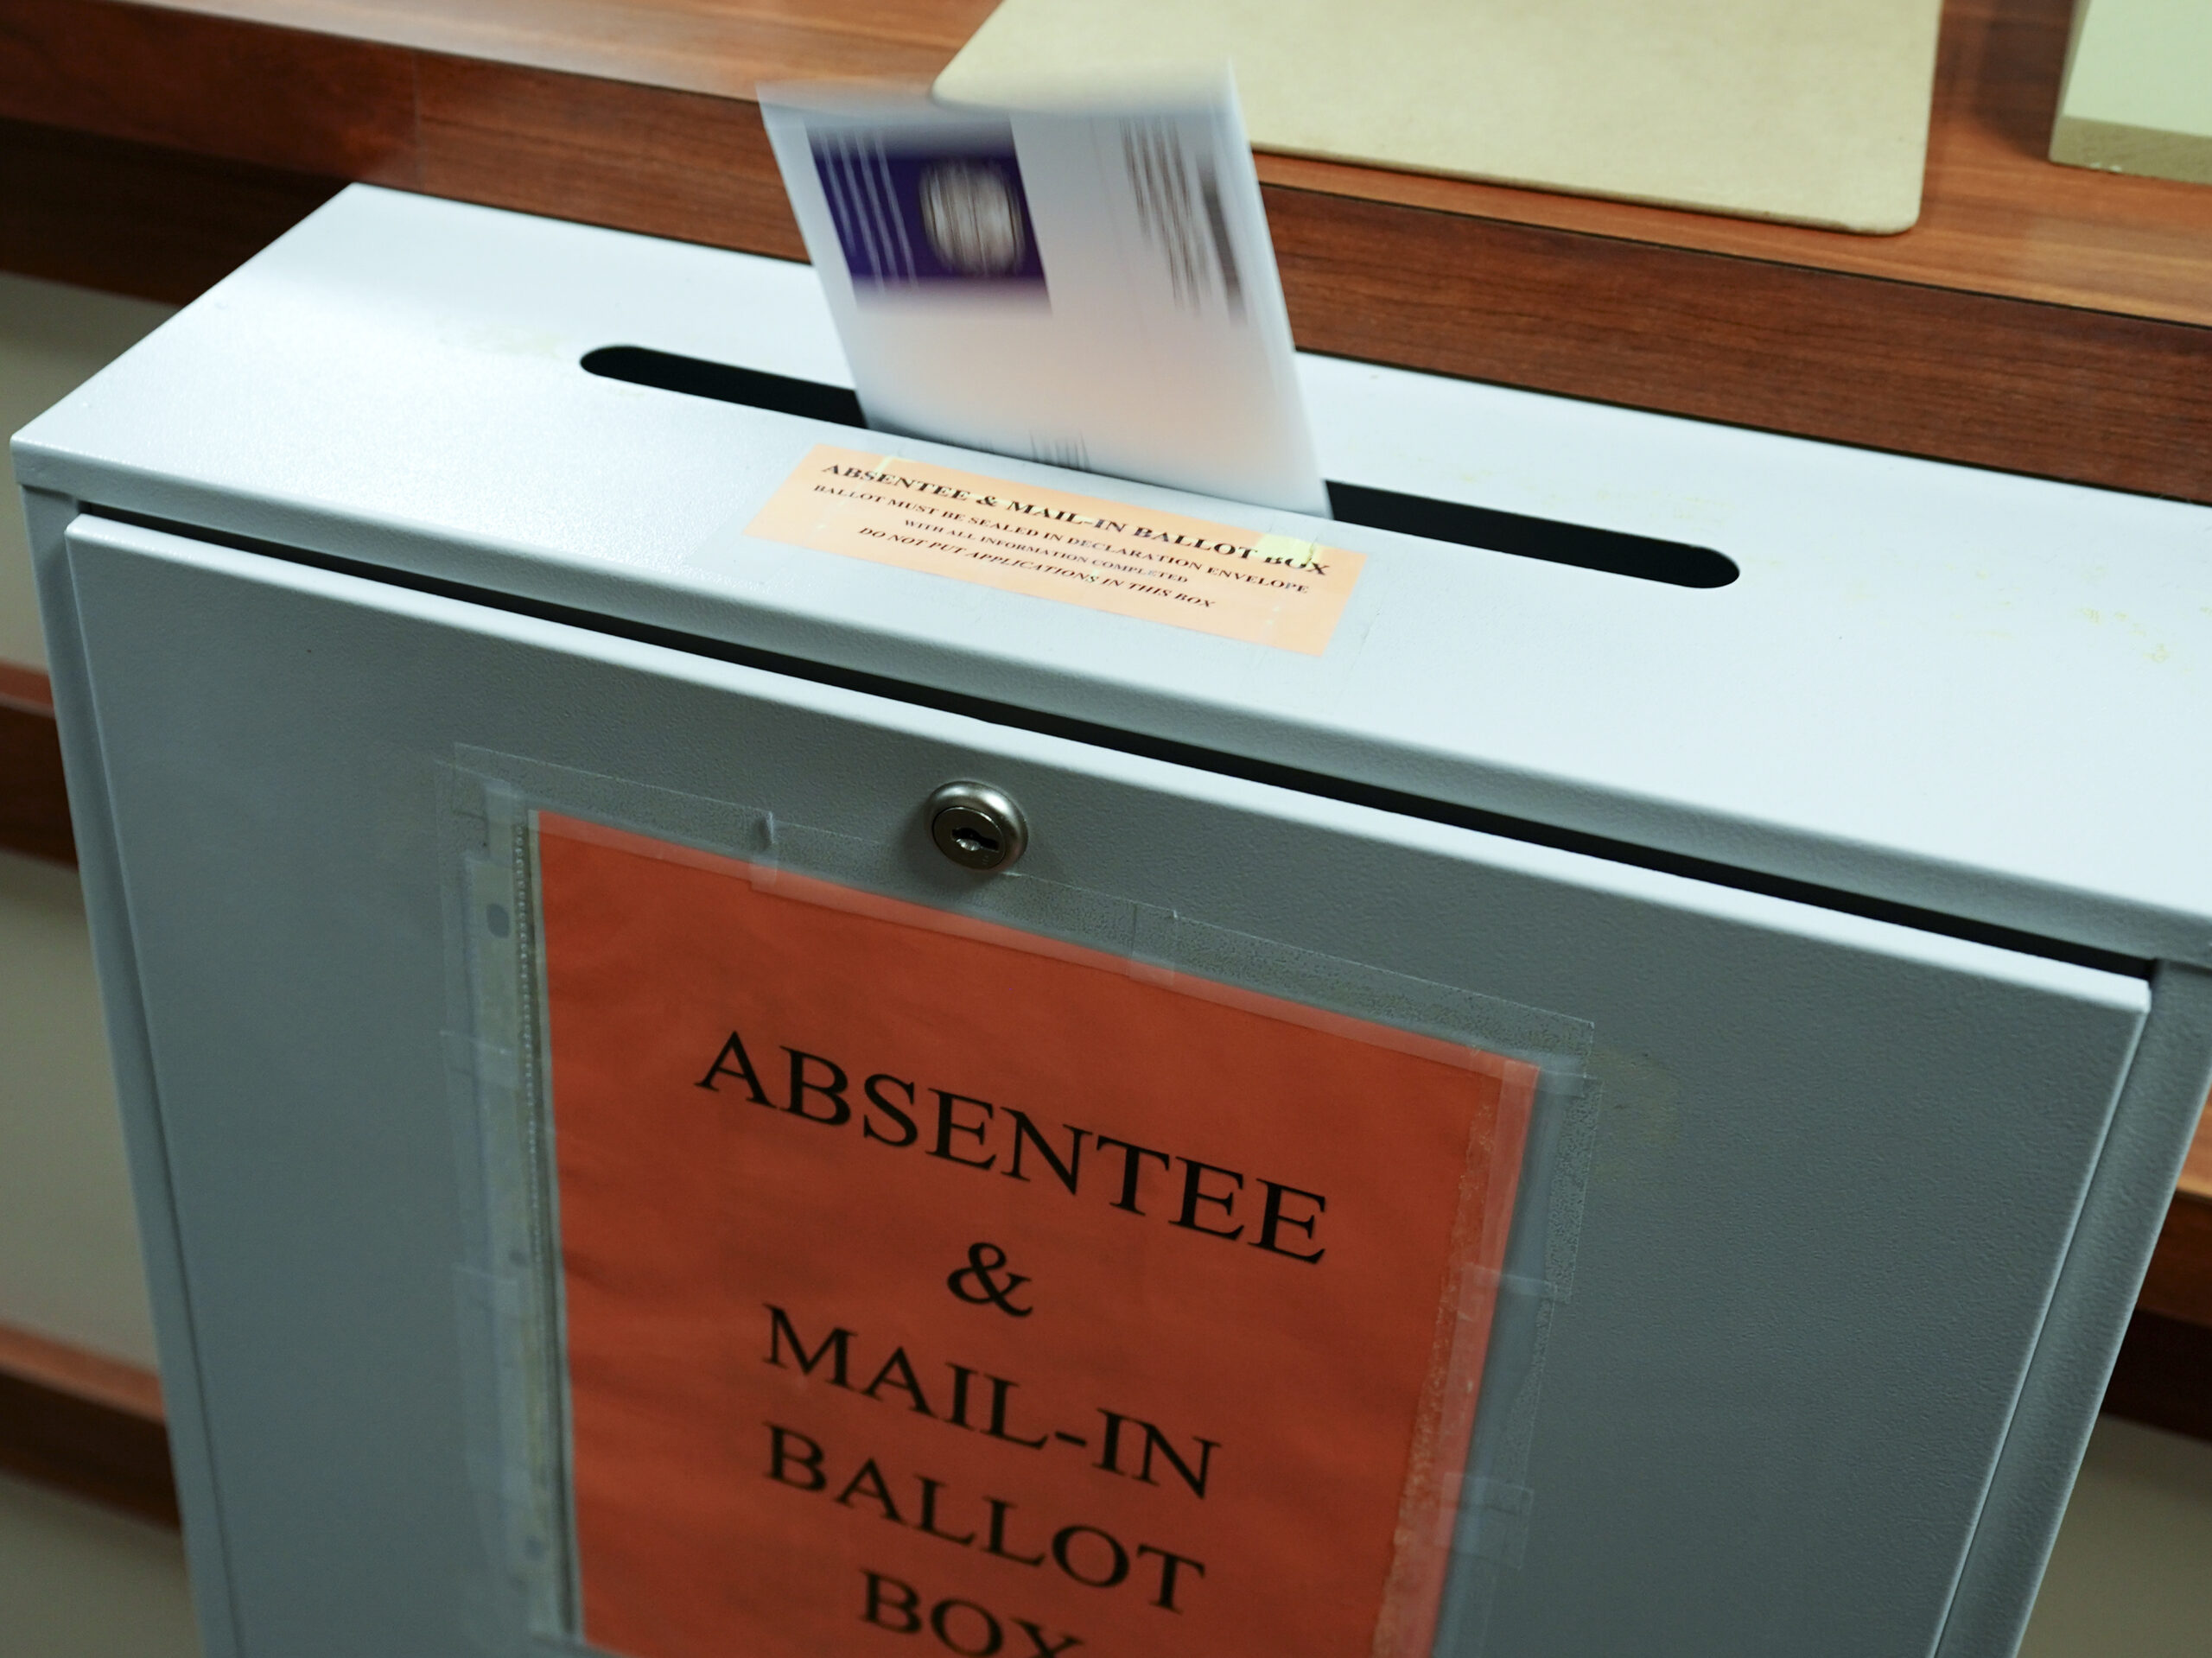 A citizen deposits a ballot into a box at the county clerk's office in Erie, Pa., on Oct. 15, 2020.